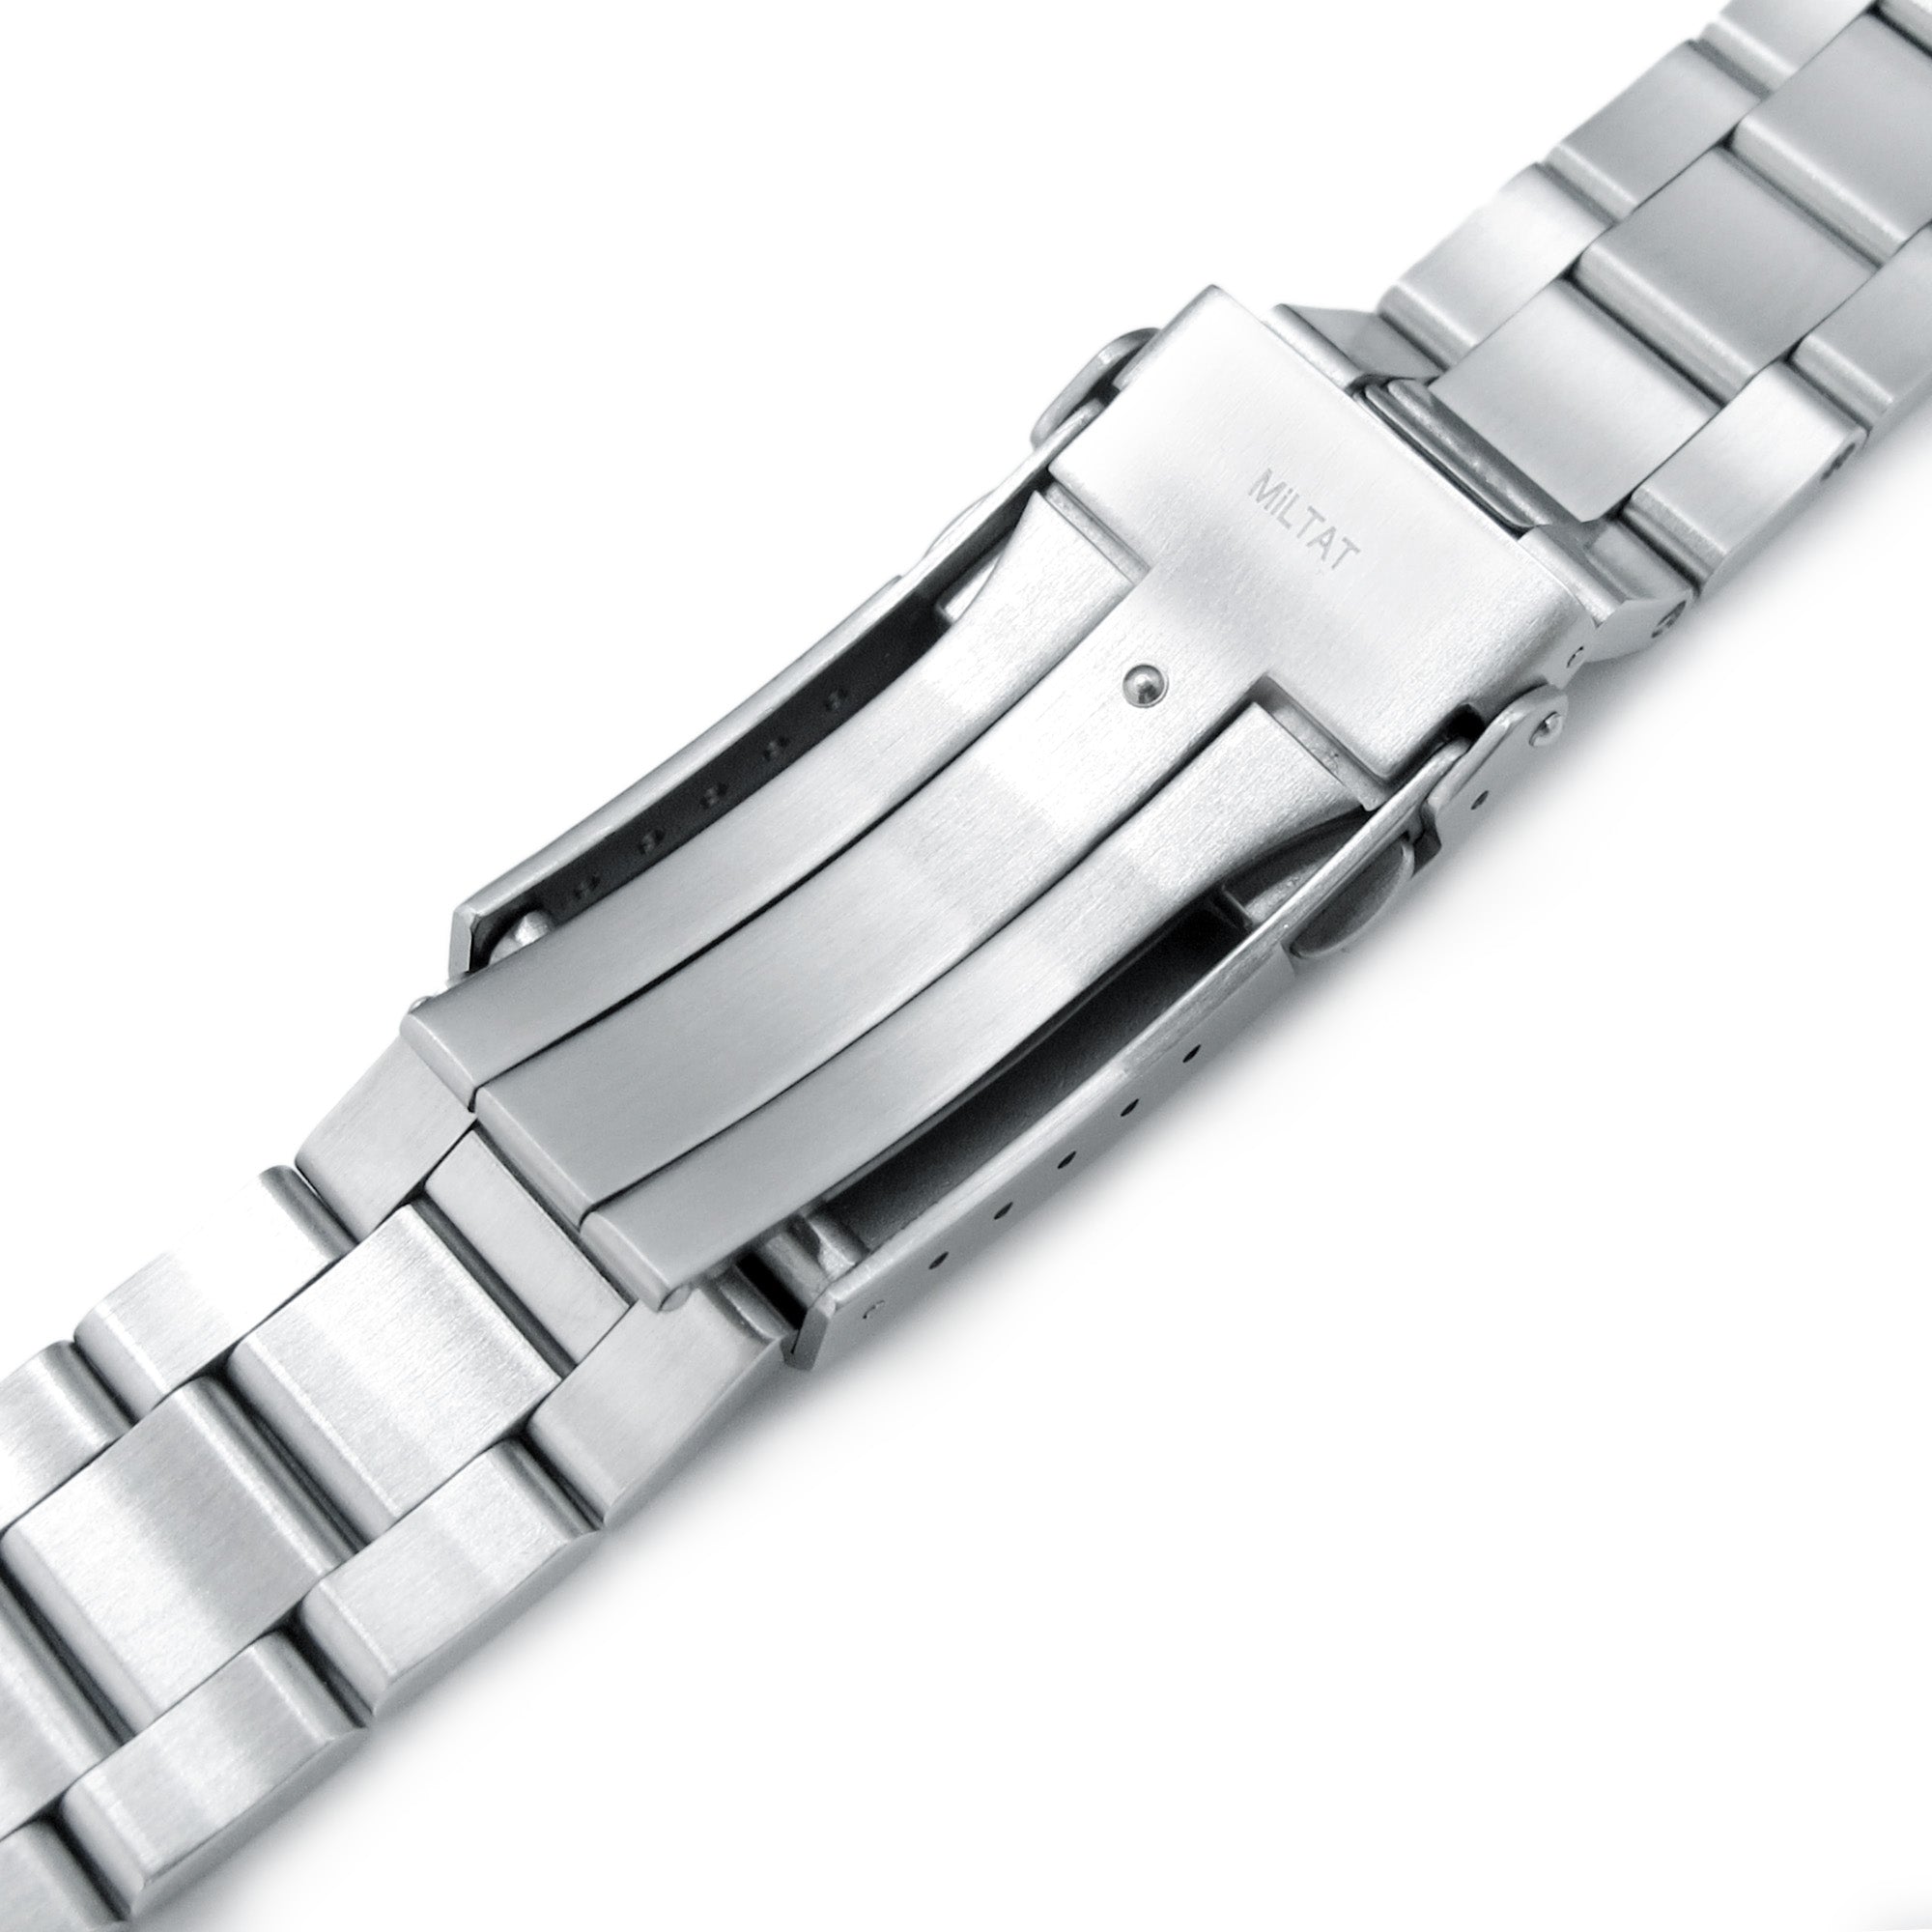 22mm Retro Razor 316L Stainless Steel Watch Bracelet for Seiko 6309-7040 Brushed V-Clasp Strapcode Watch Bands